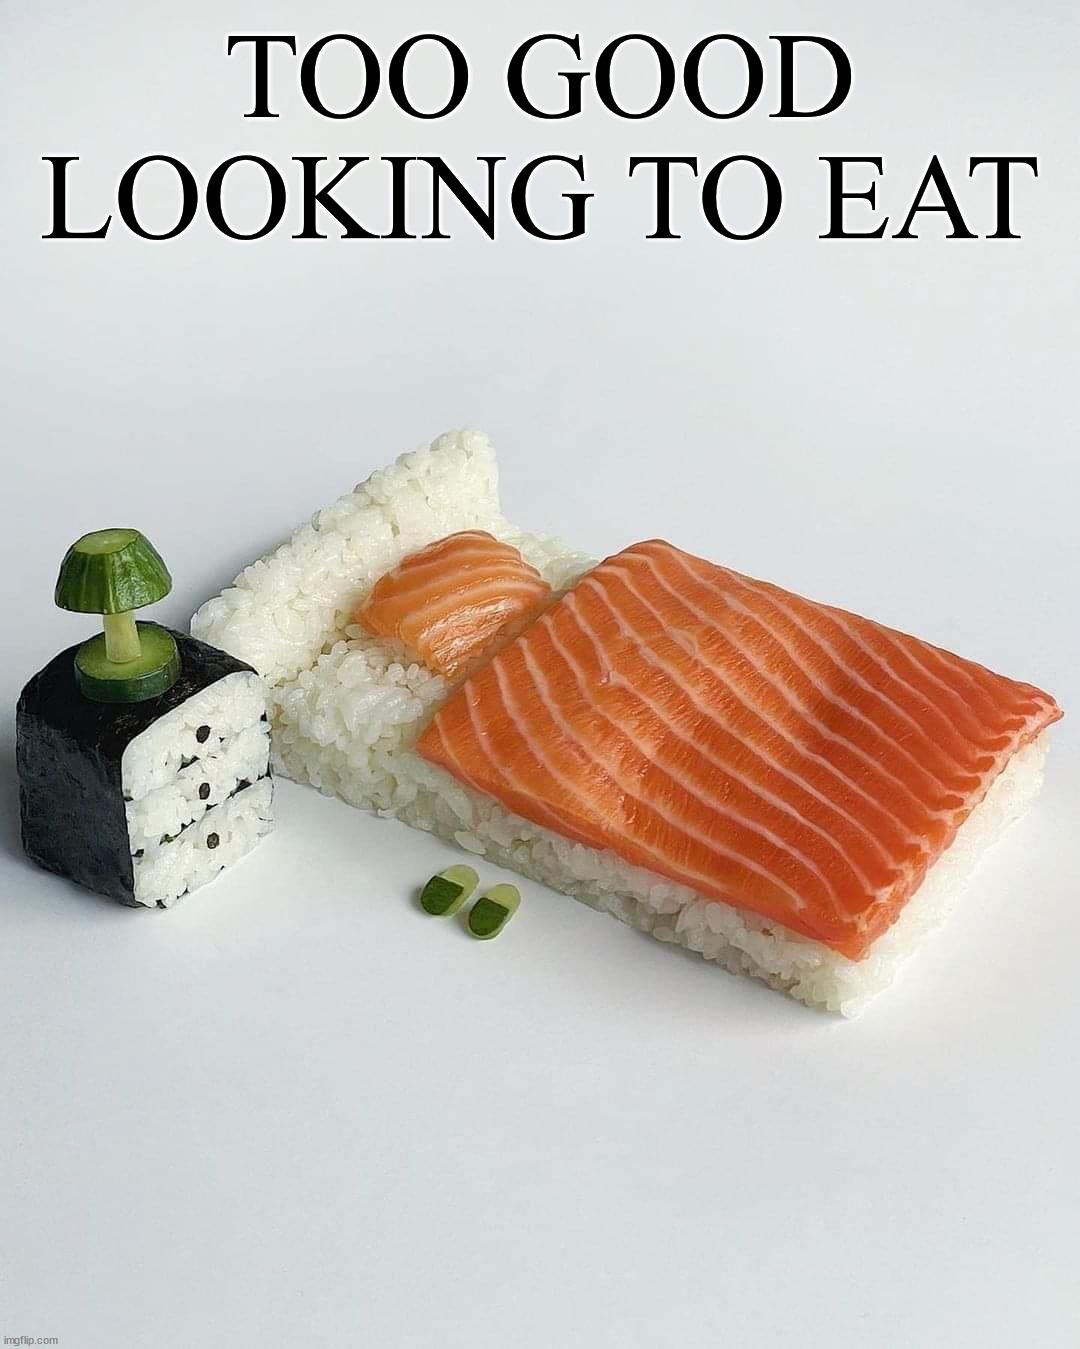 TOO GOOD LOOKING TO EAT | made w/ Imgflip meme maker